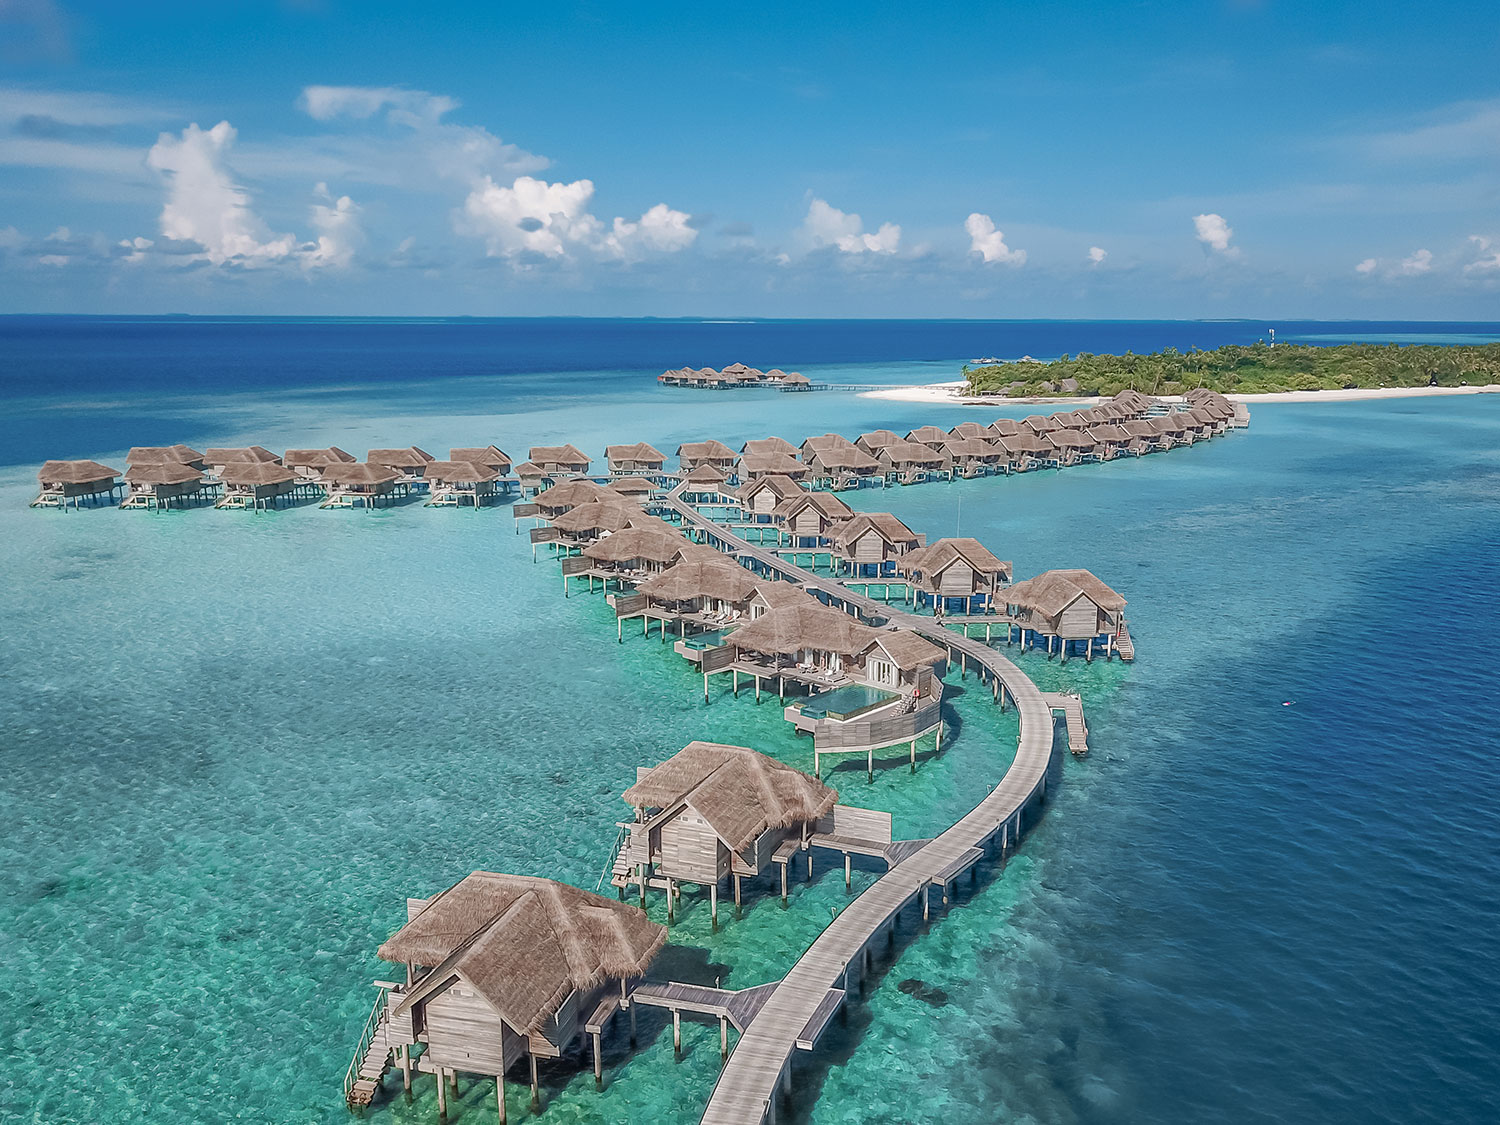 An aerial view of the overwater residences at Vakkaru Maldives